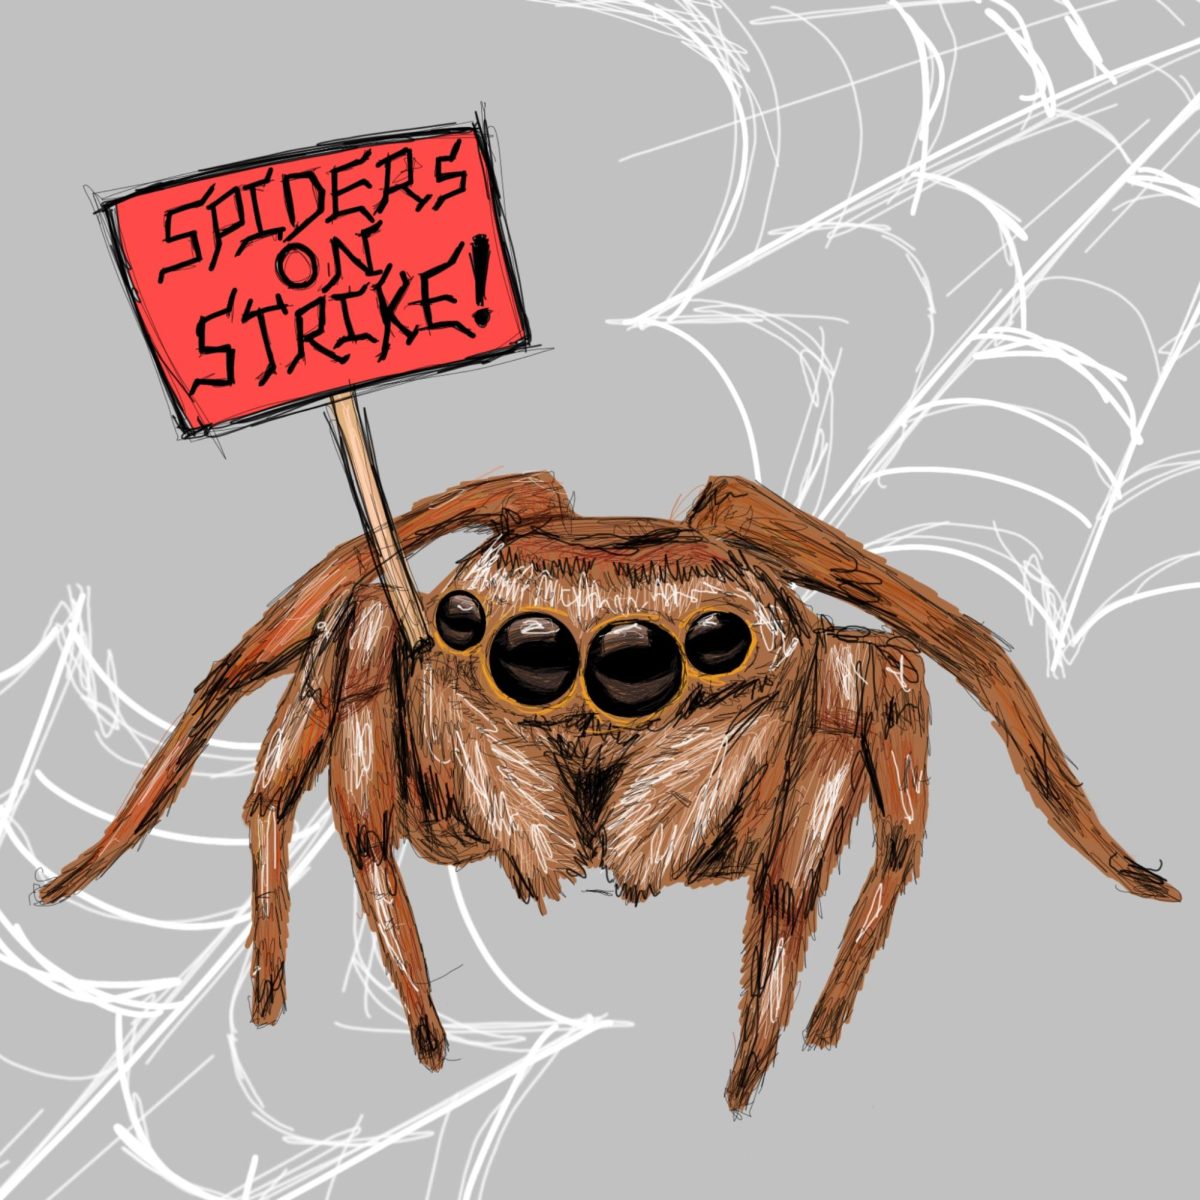 A tarantula sits in its web holding a Spiders on Strike! sign.